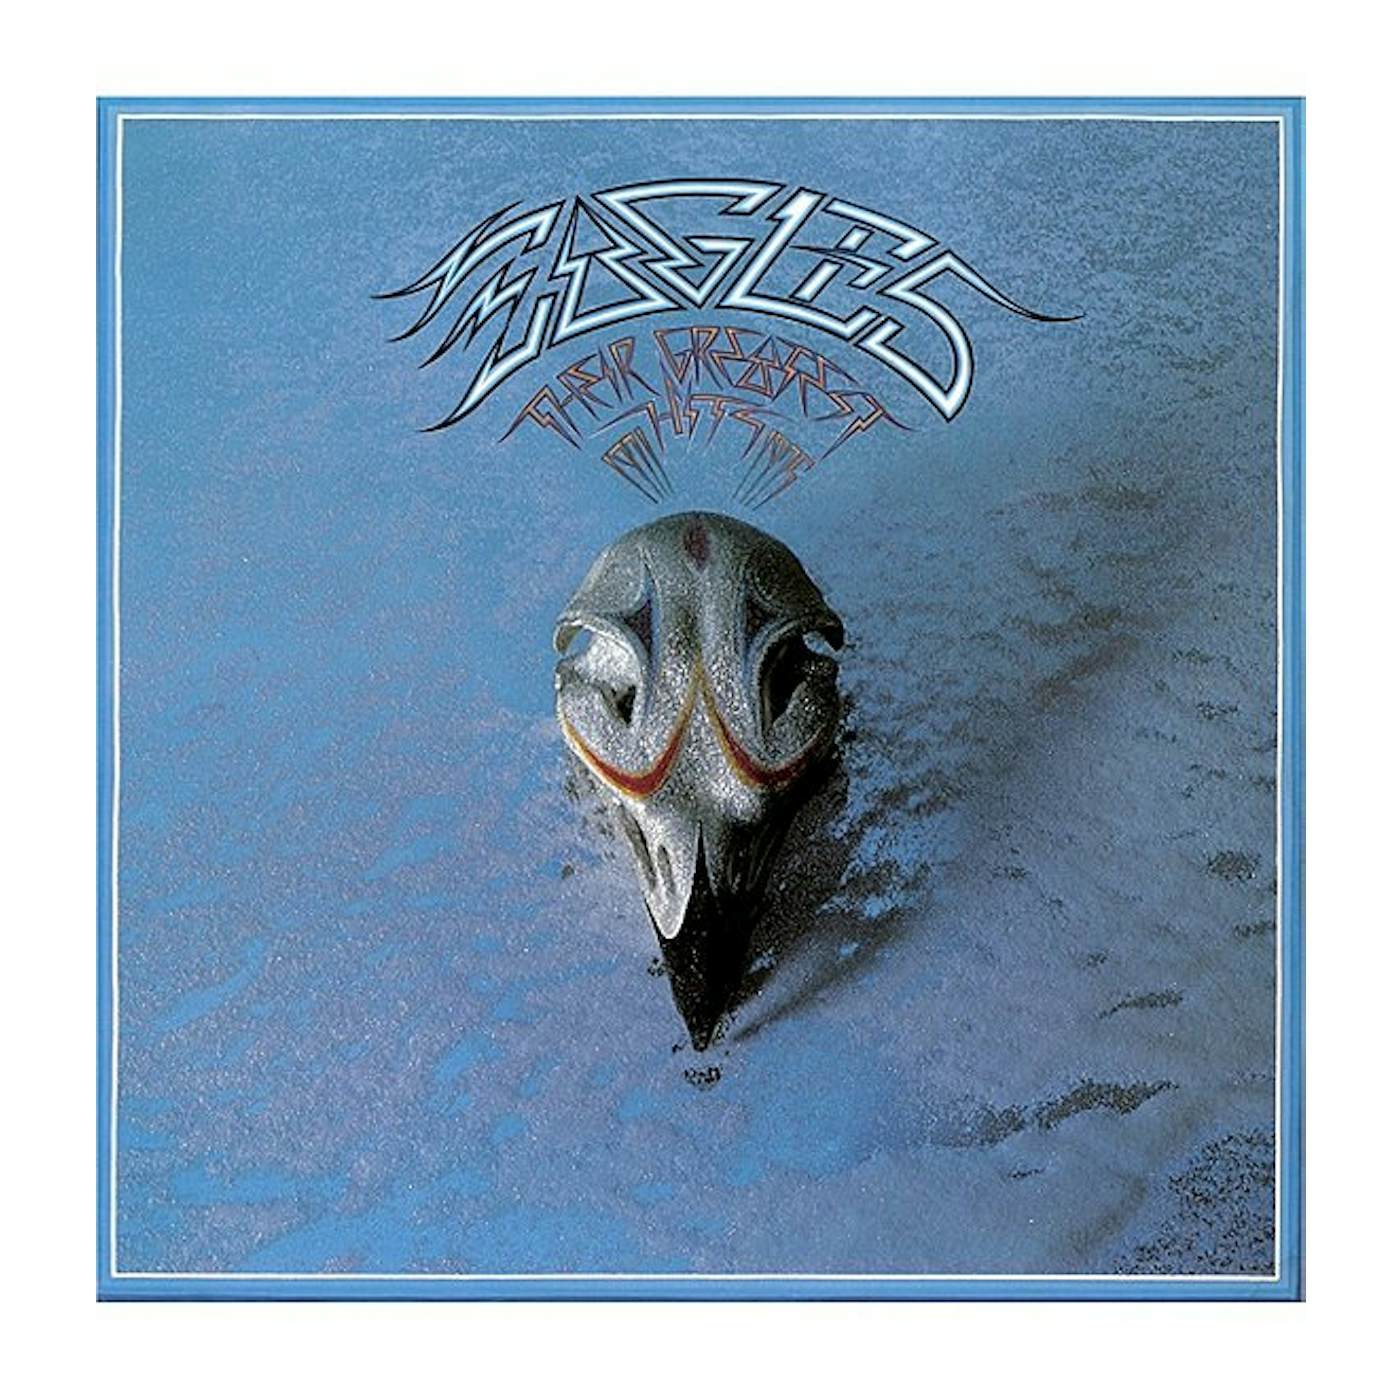 Eagles THEIR GREATEST HITS 1971-1975 Vinyl Record